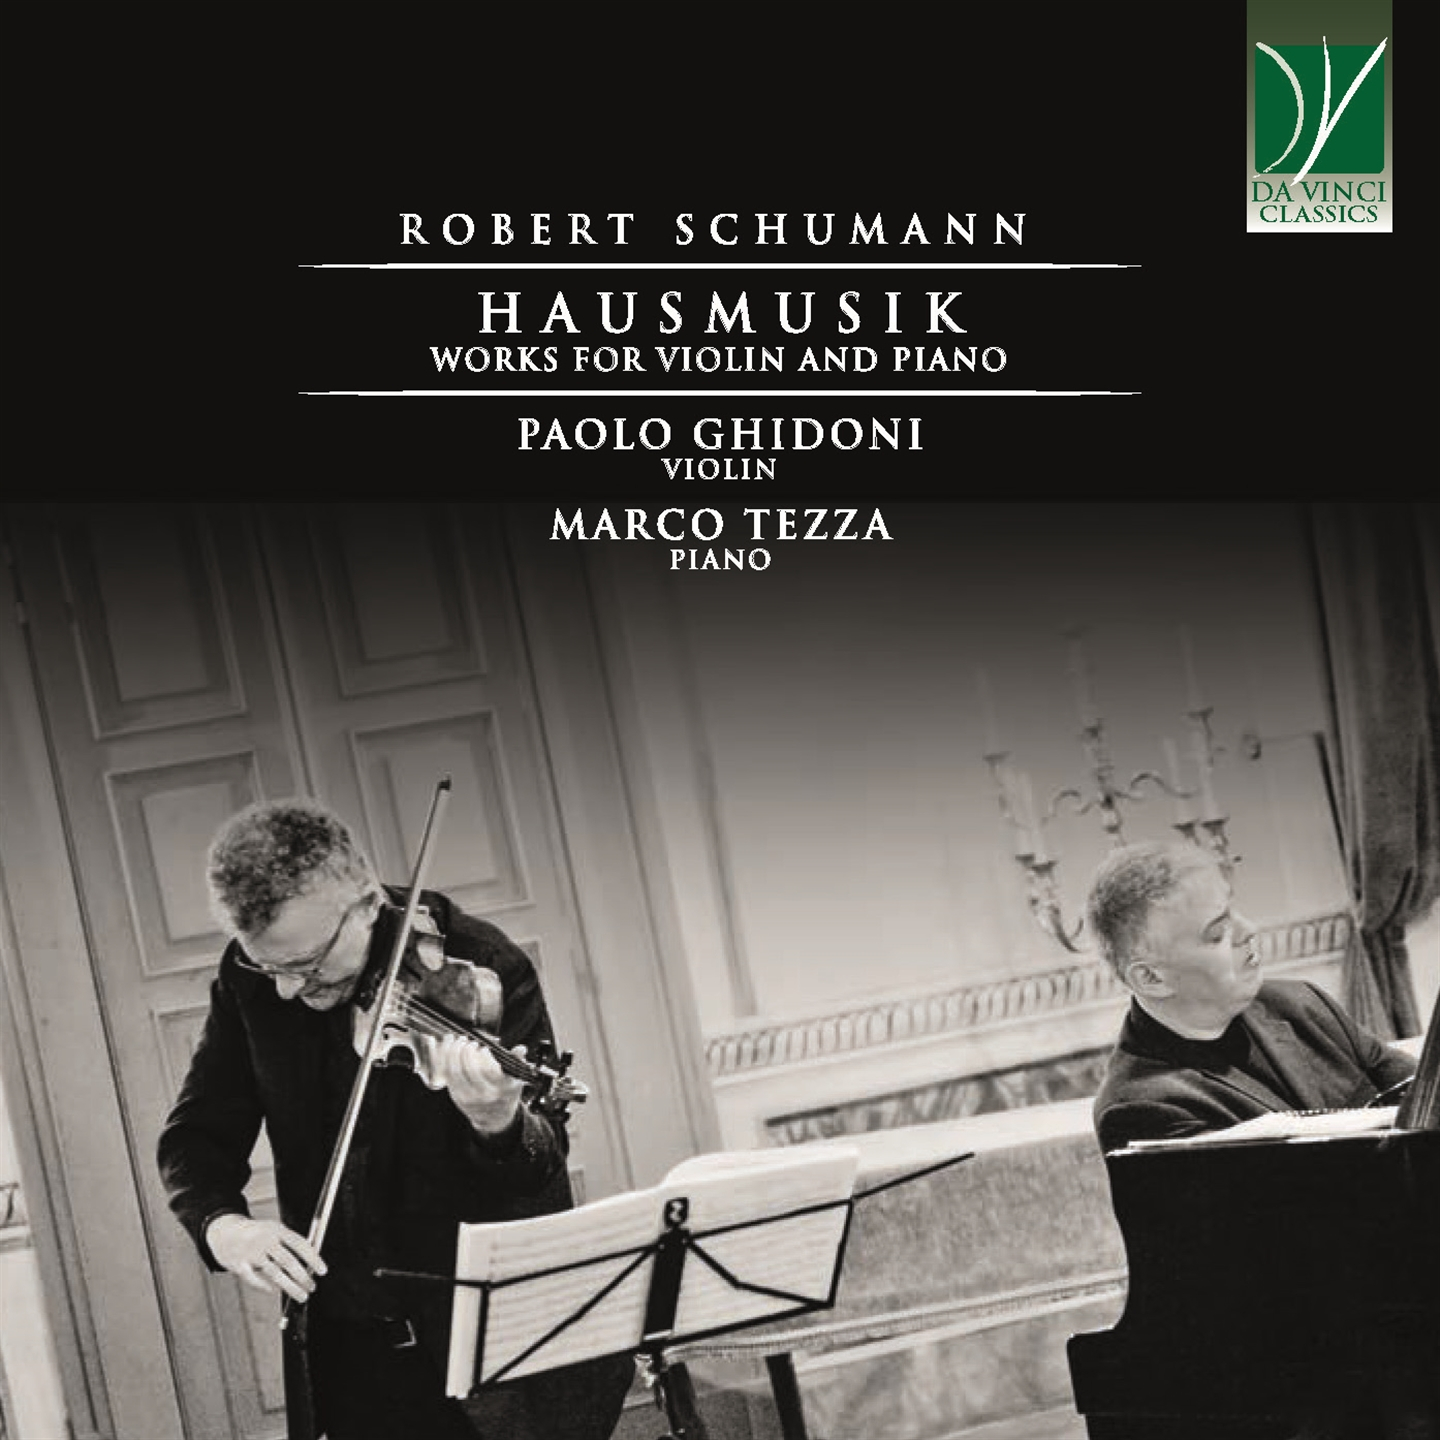 SCHUMANN: HAUSMUSIK, WORKS FOR VIOLIN AND PIANO